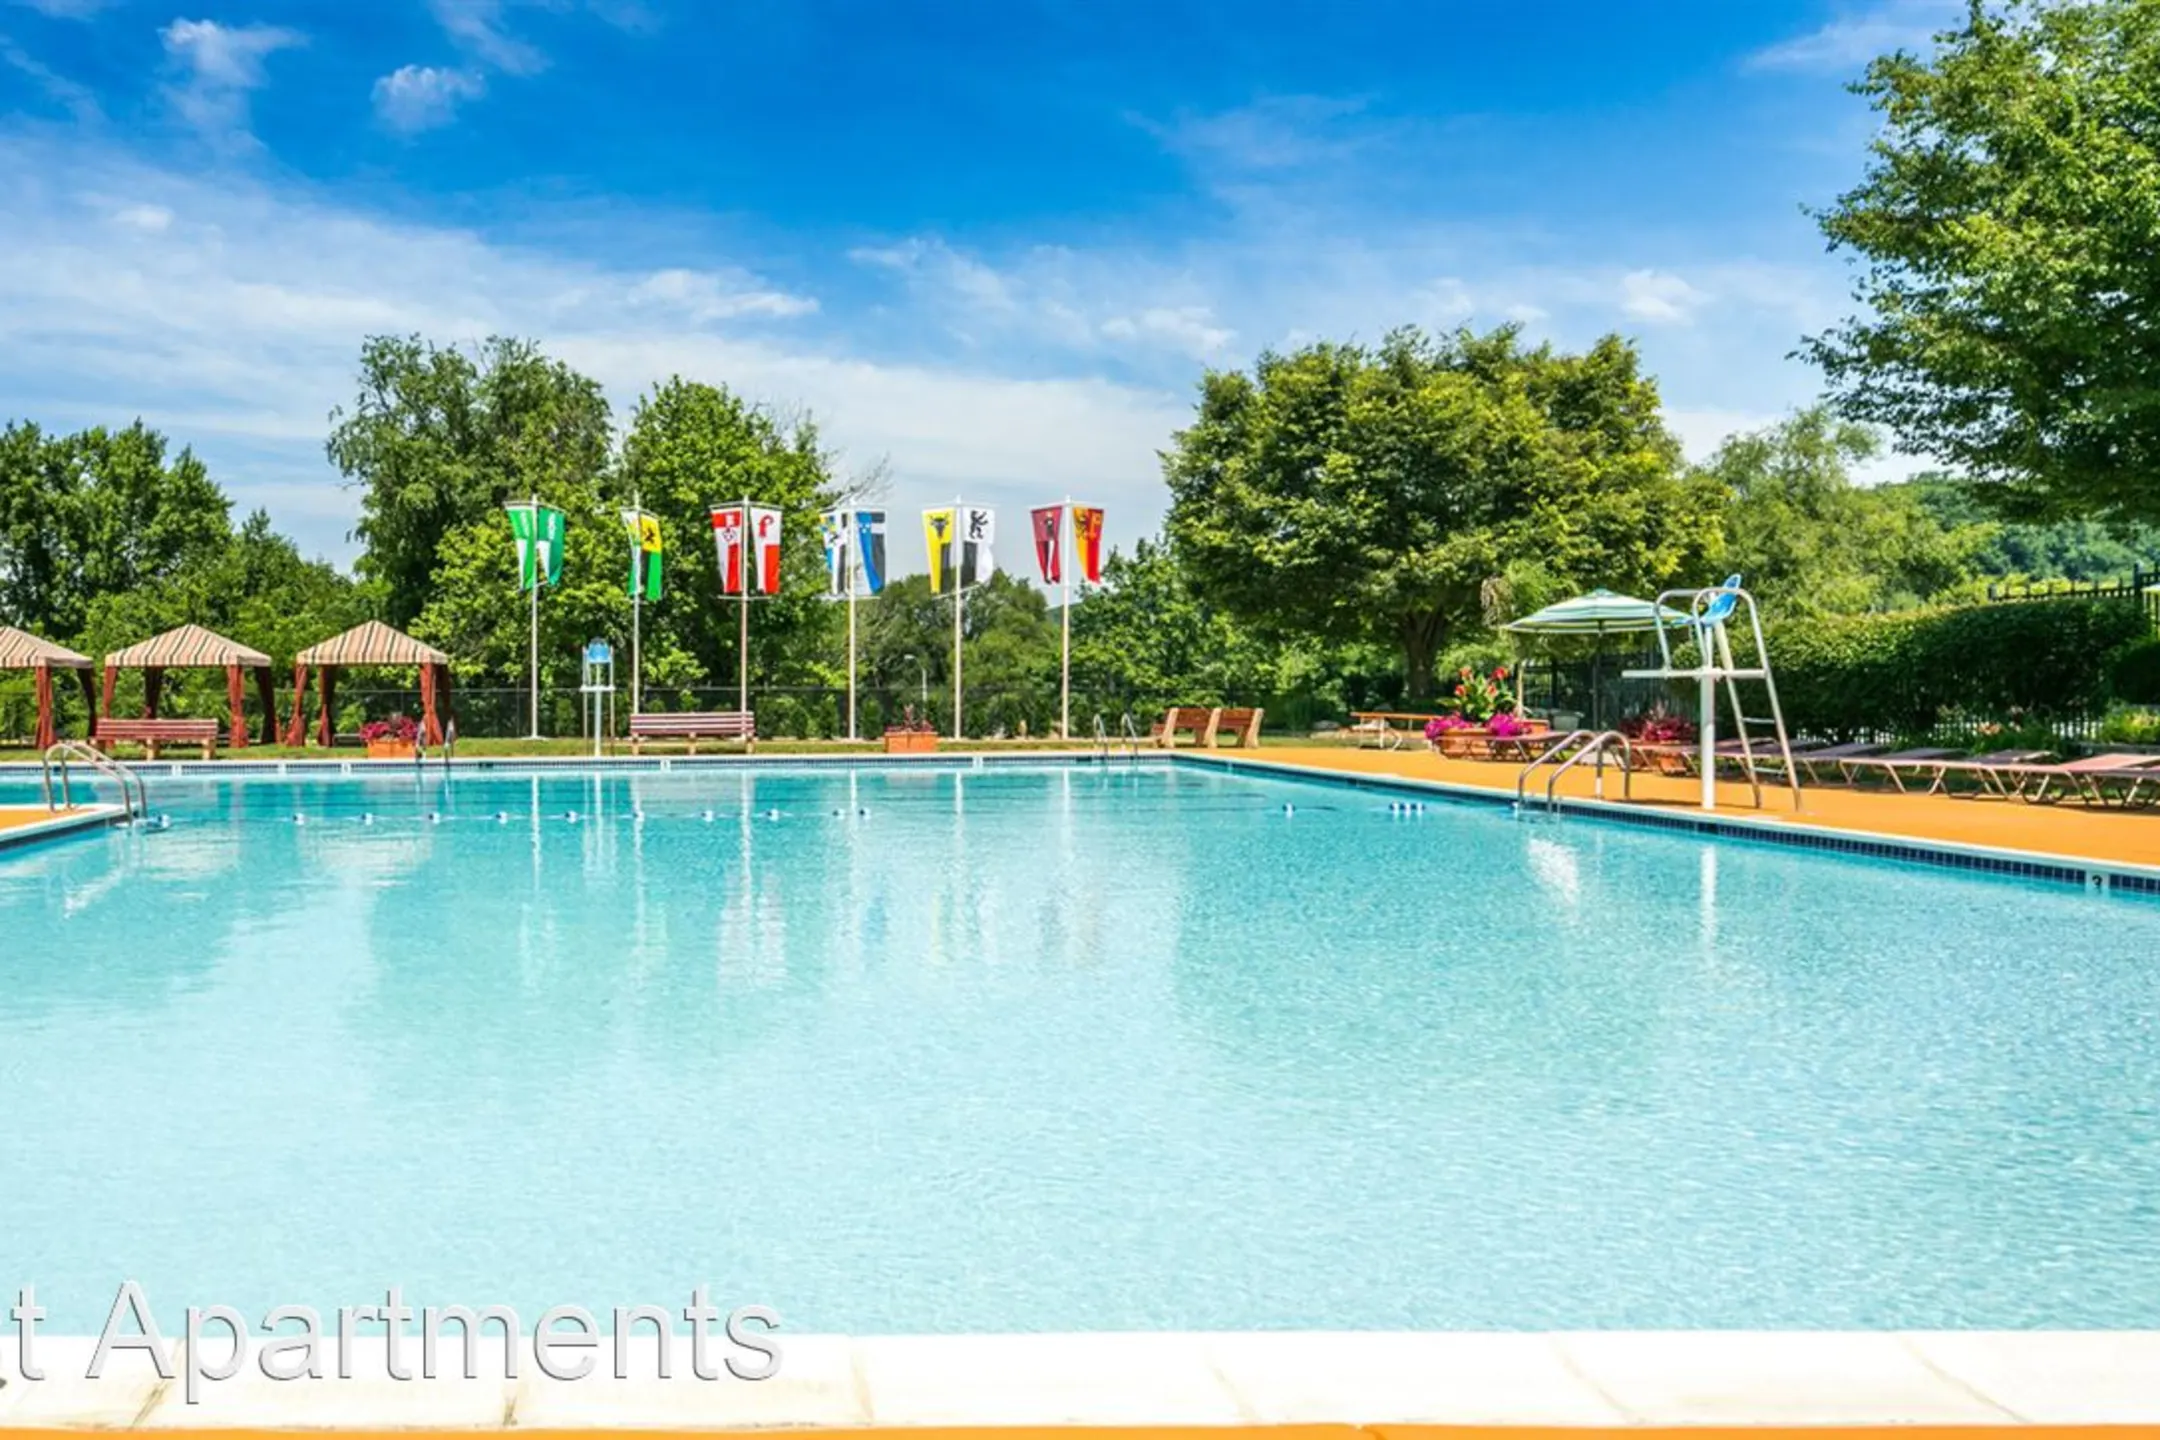 Pool - Briarcliff Apartments - Cockeysville, MD